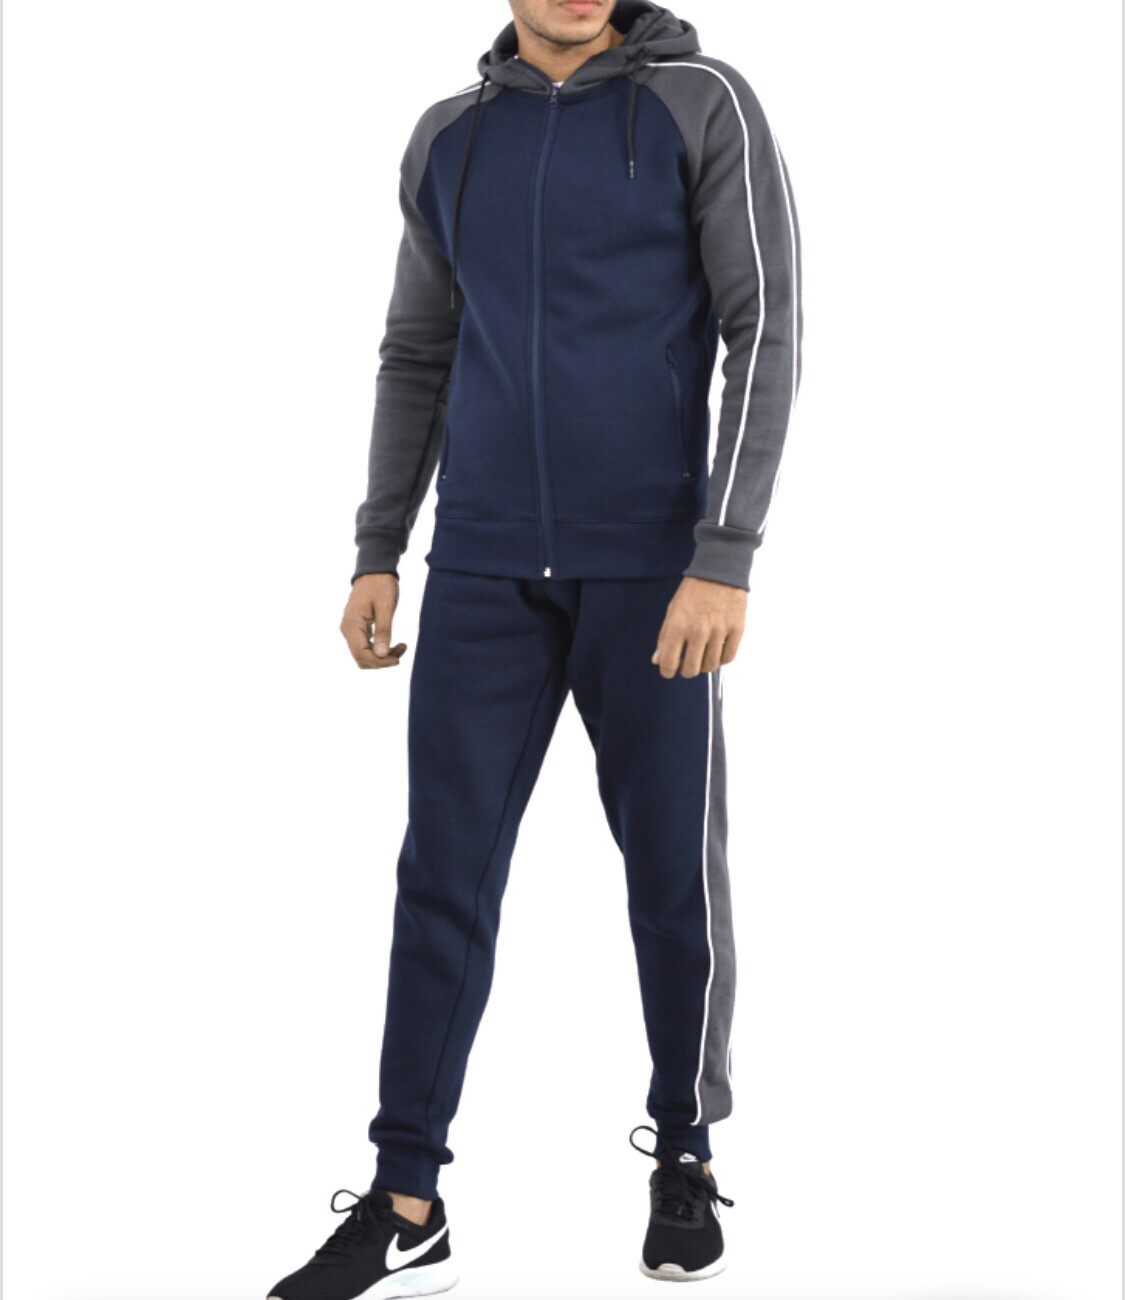 Jack & Danny's - Navy and Grey Color Fleece Tracksuit